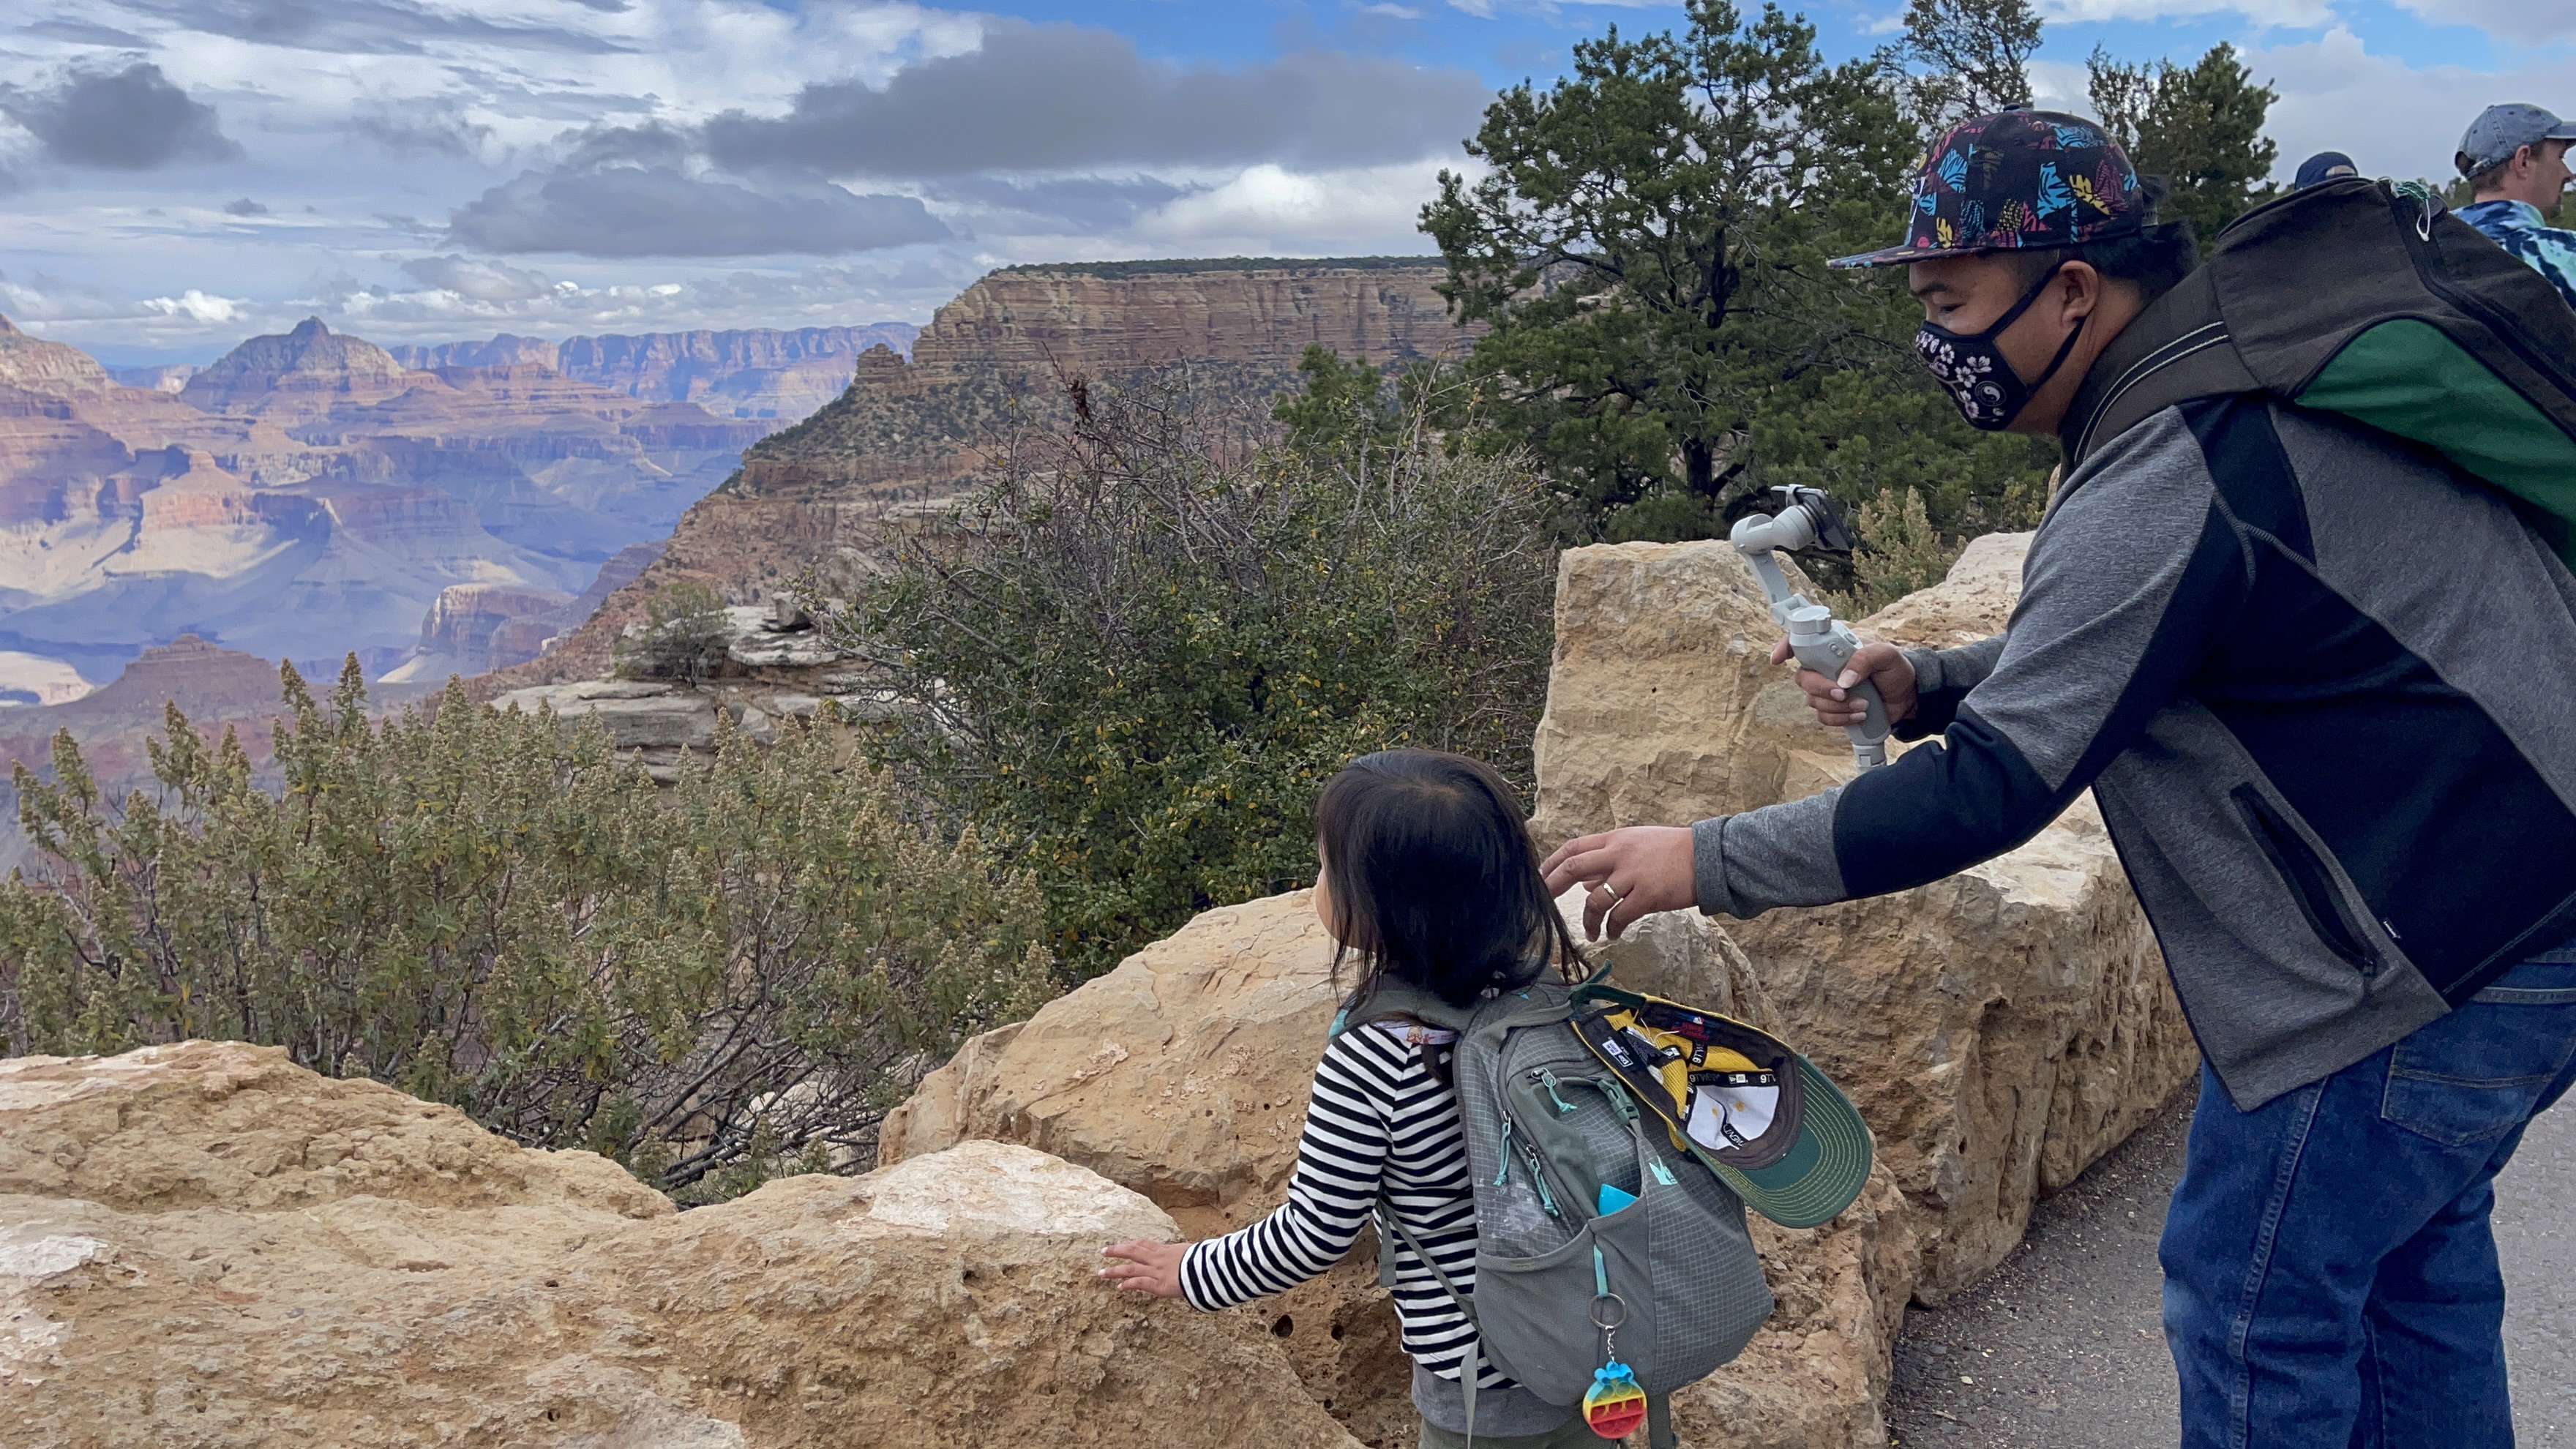 A child stands close to a border rock facing the Grand Canyon while an adult behind them reaches their hand out to pull them back.